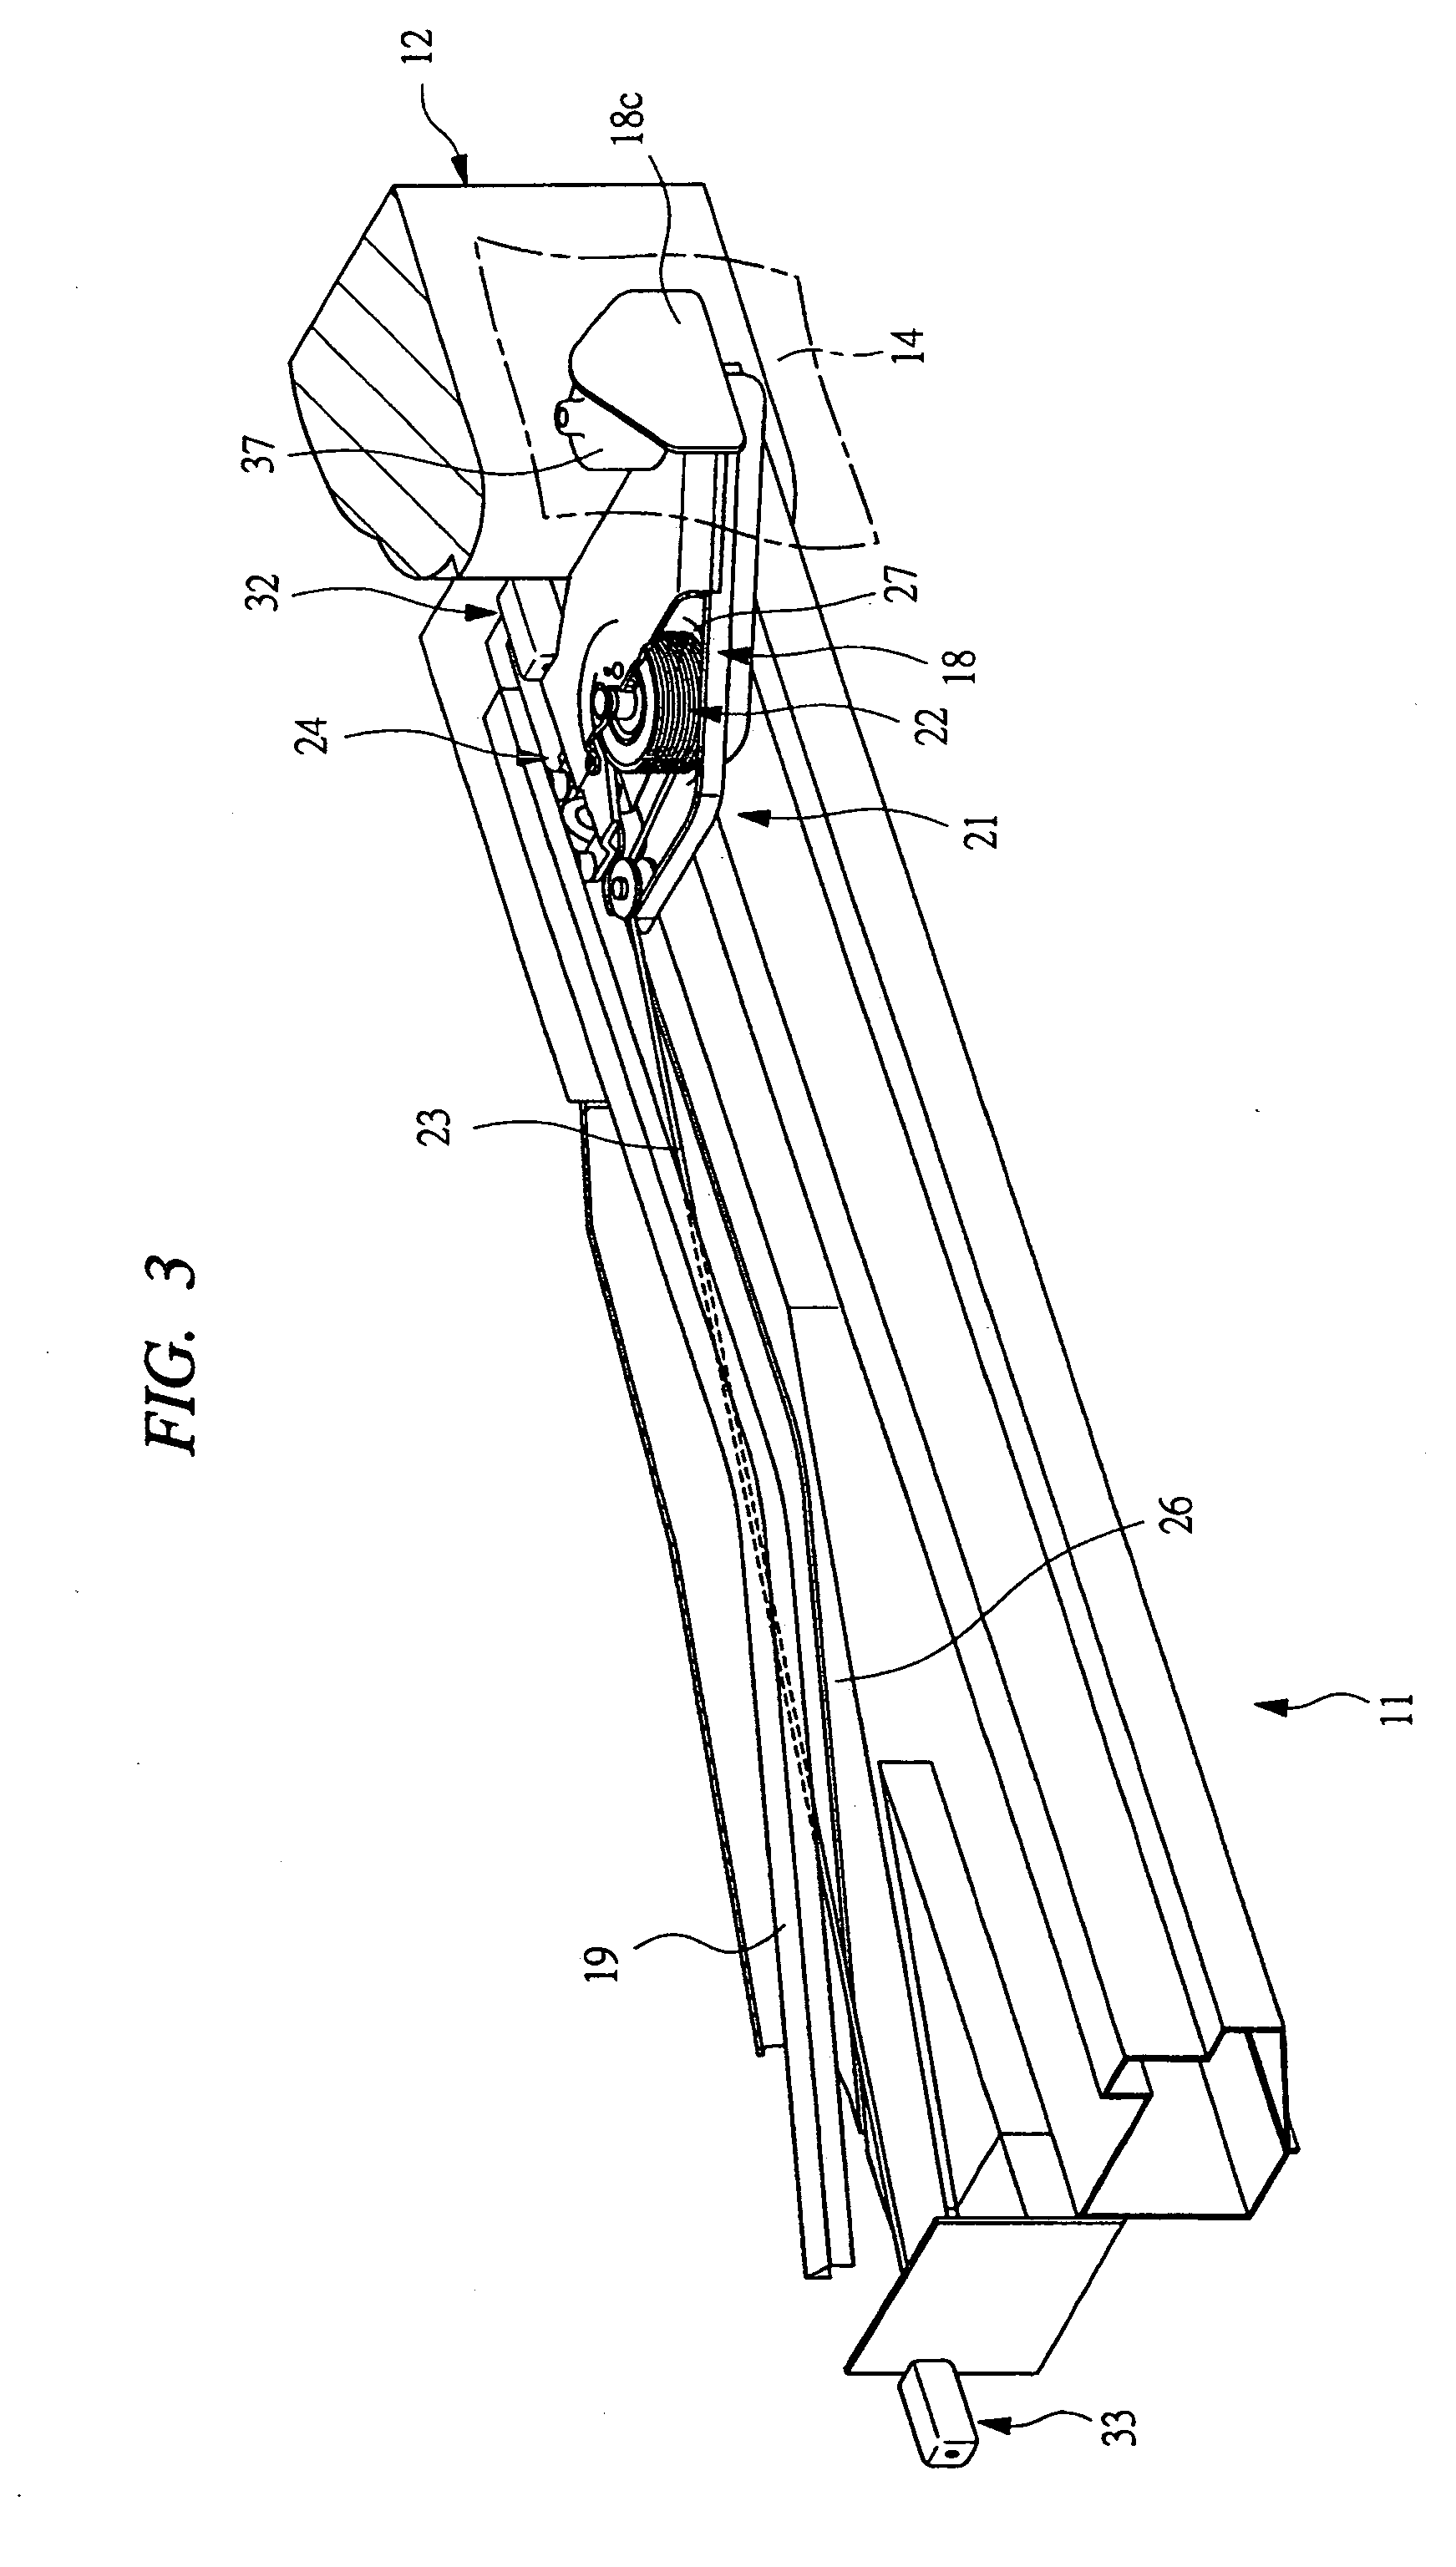 Sliding door opening and closing device